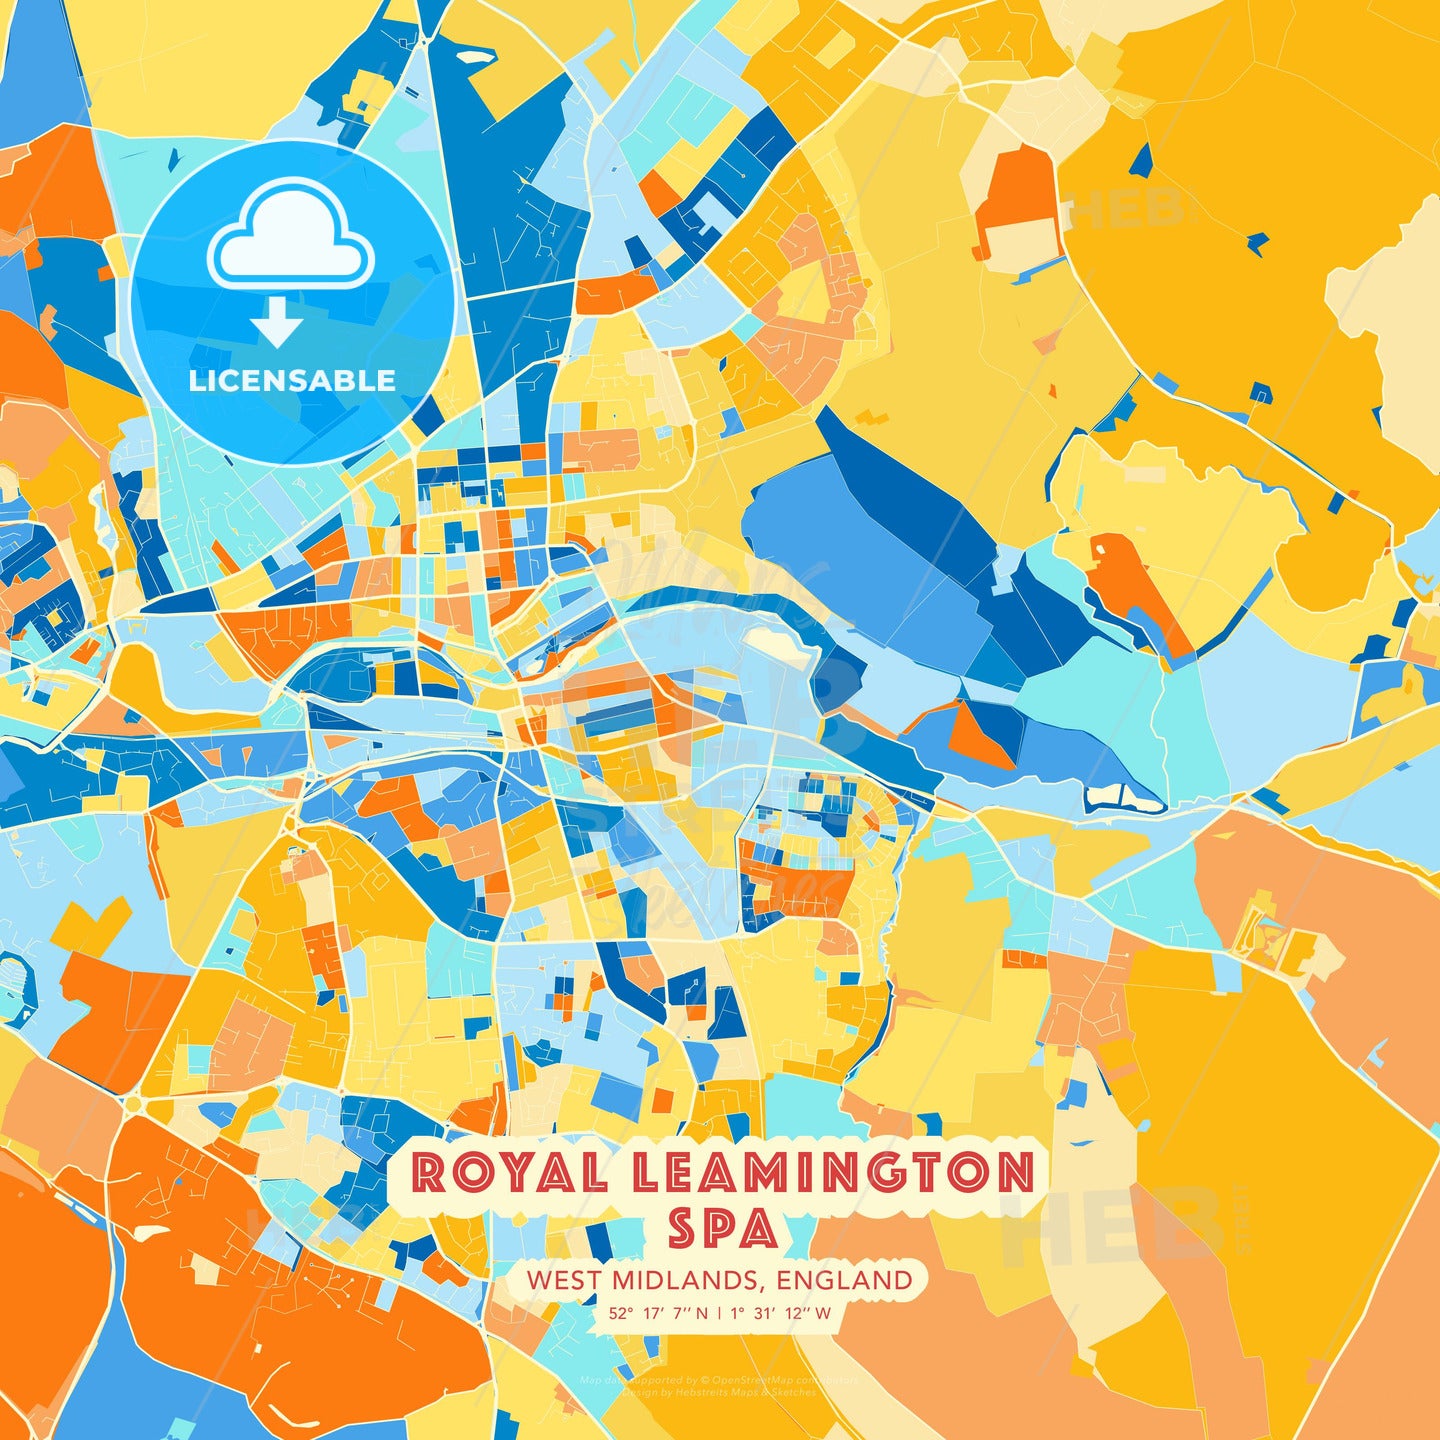 Royal Leamington Spa, West Midlands, England, map - HEBSTREITS Sketches